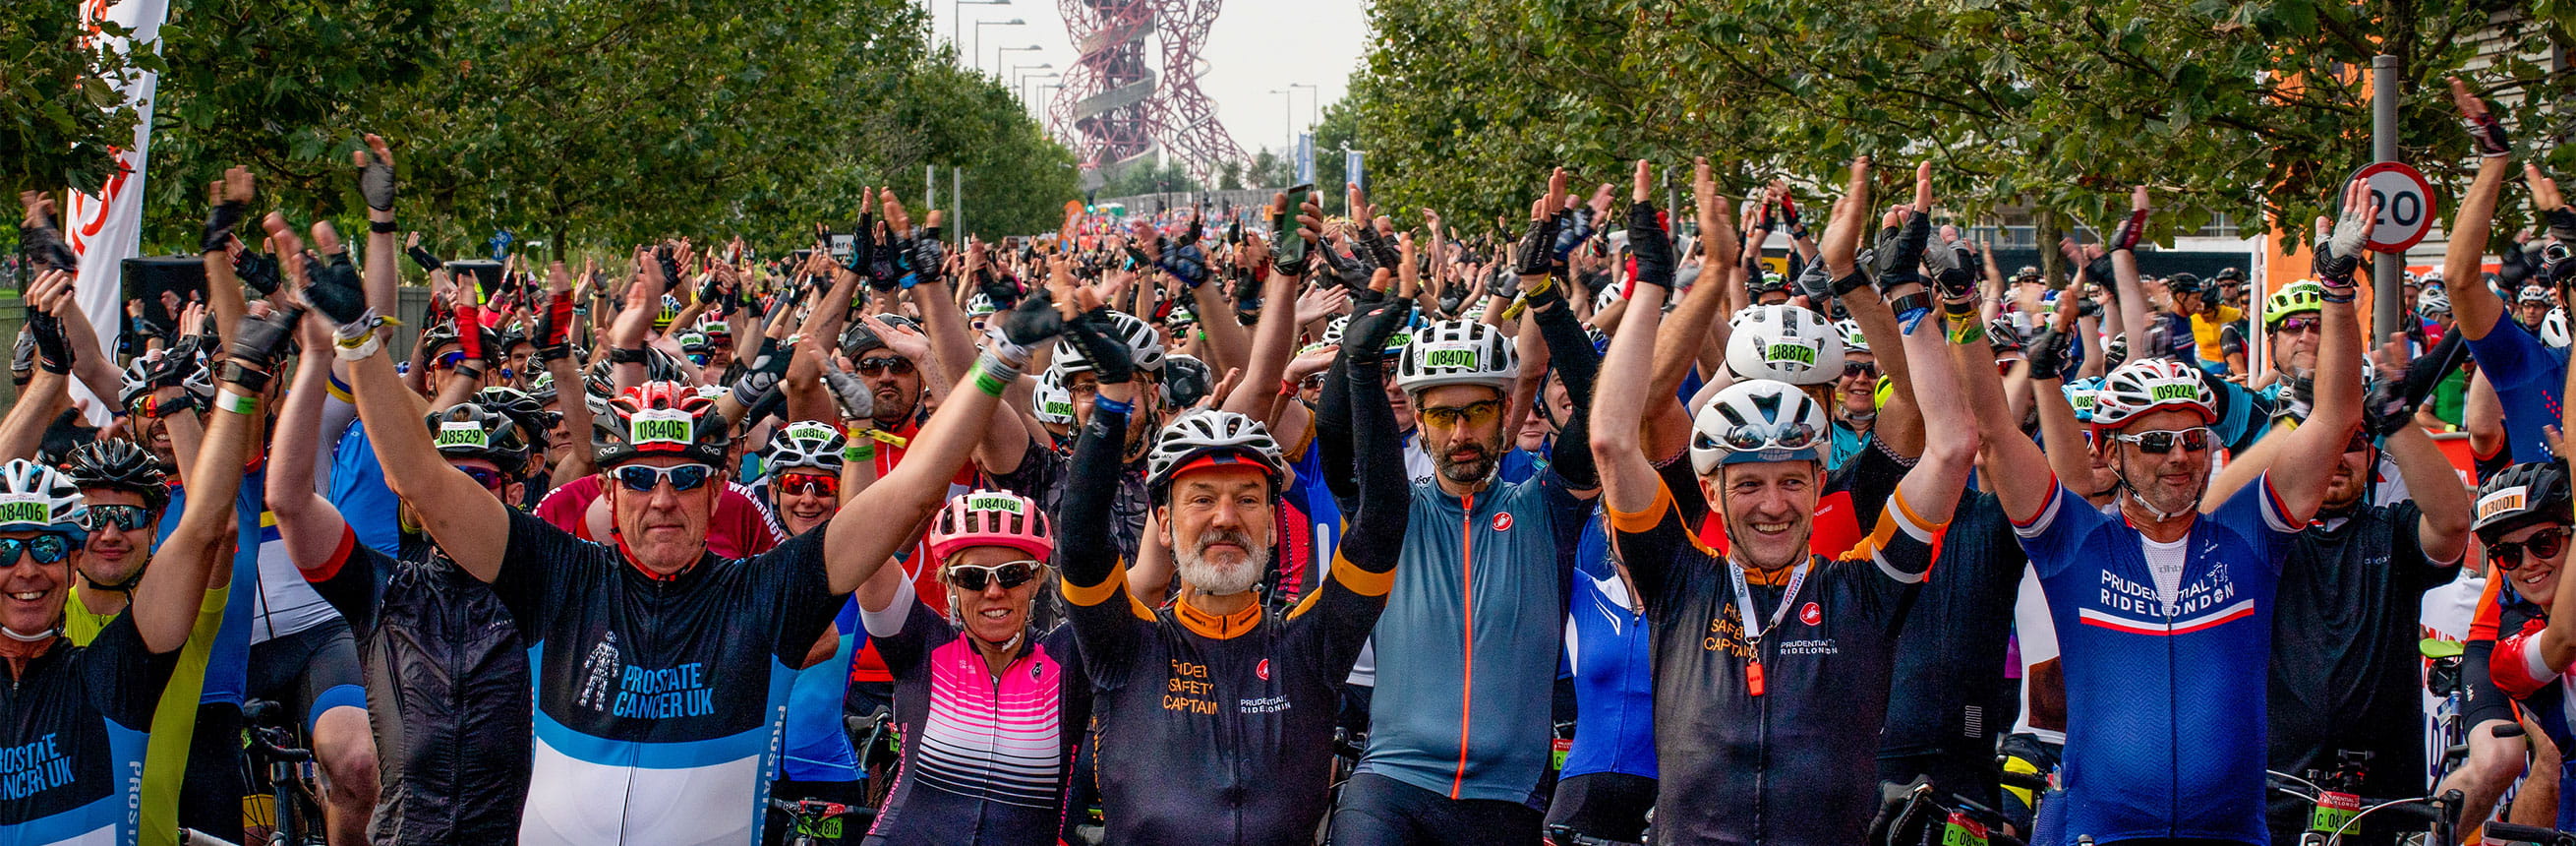 The riders clap at the start line for RideLondon as part of The RideLondon Sportives